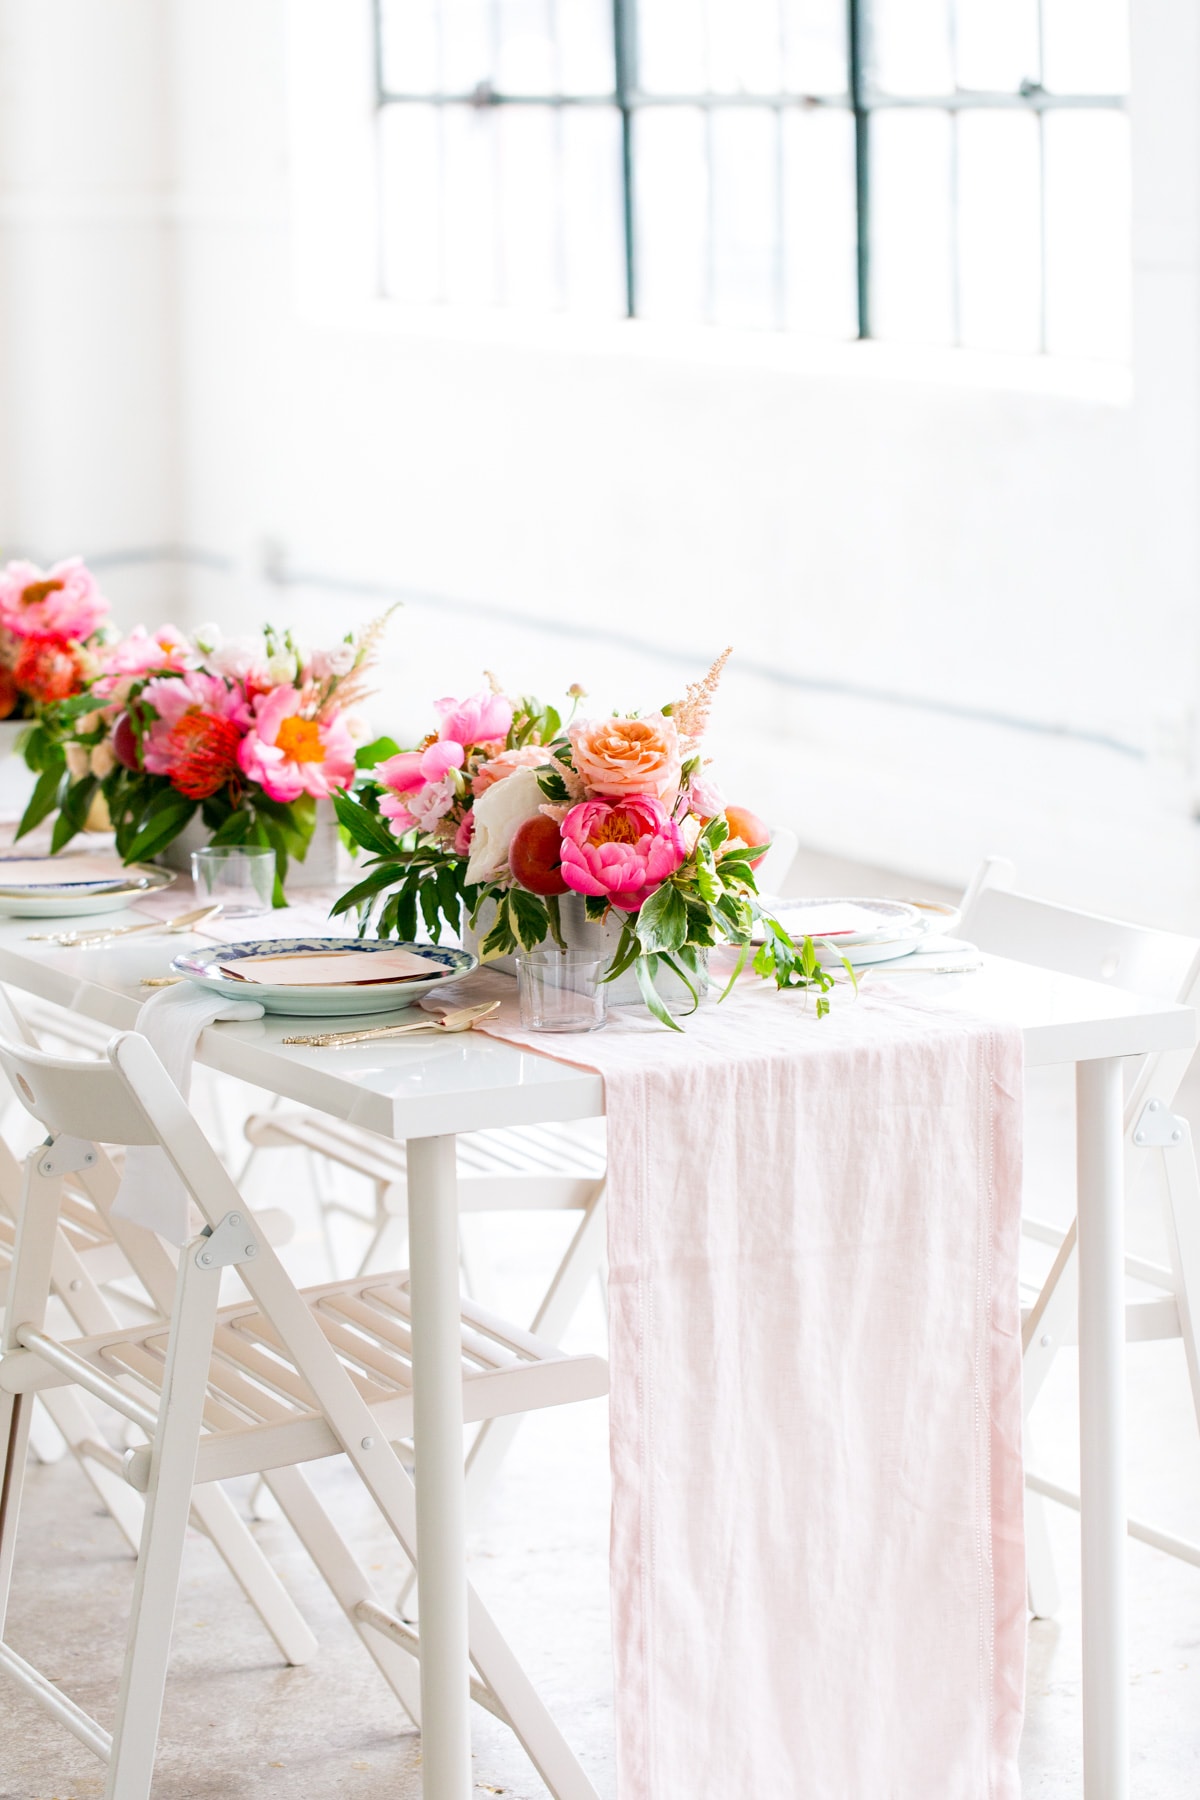 A Southern Inspired Bridal Shower and DIY Backdrop by Ashley Rose of Sugar & Cloth, a lifestyle blog in Houston, TX